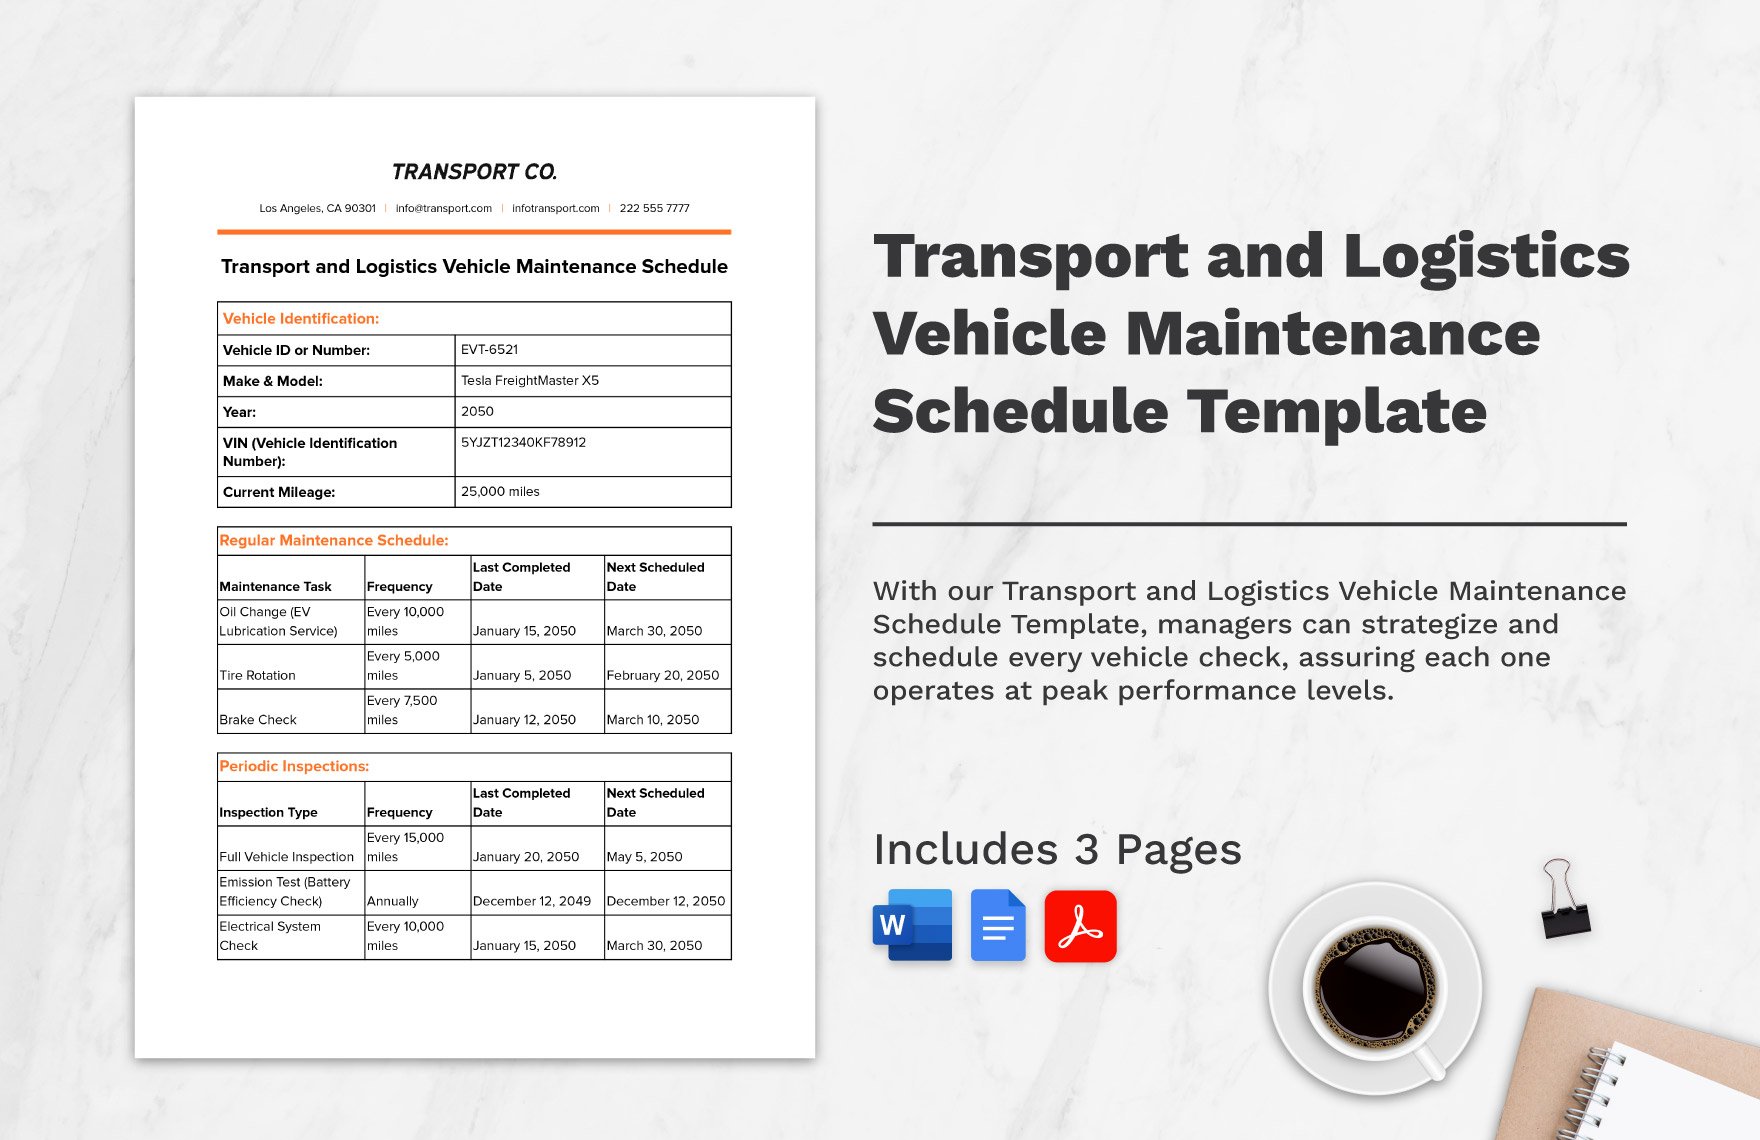 Transport and Logistics Vehicle Maintenance Schedule Template